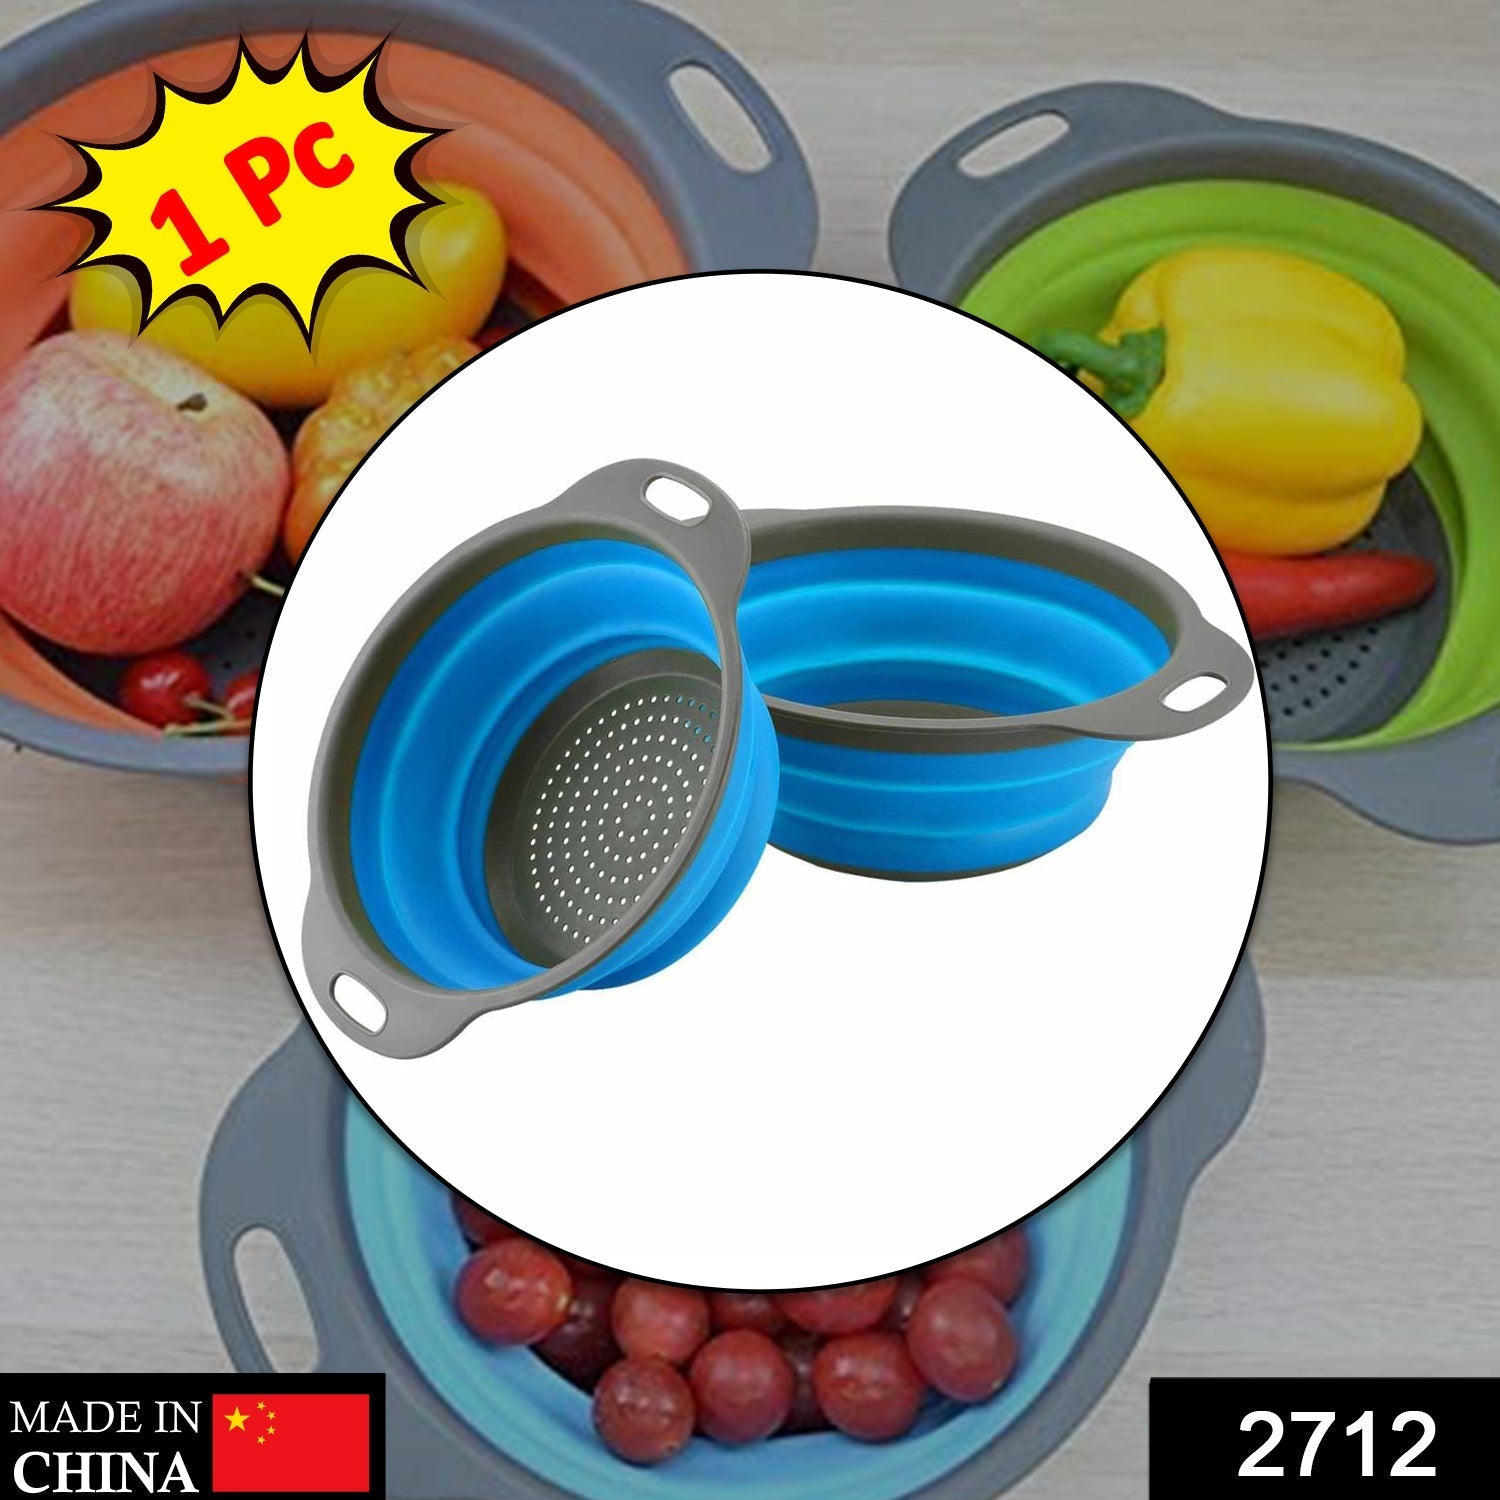 2712 Round Sili Strain used in all kinds of household and official kitchen purposes as a Foldable utensil. DeoDap